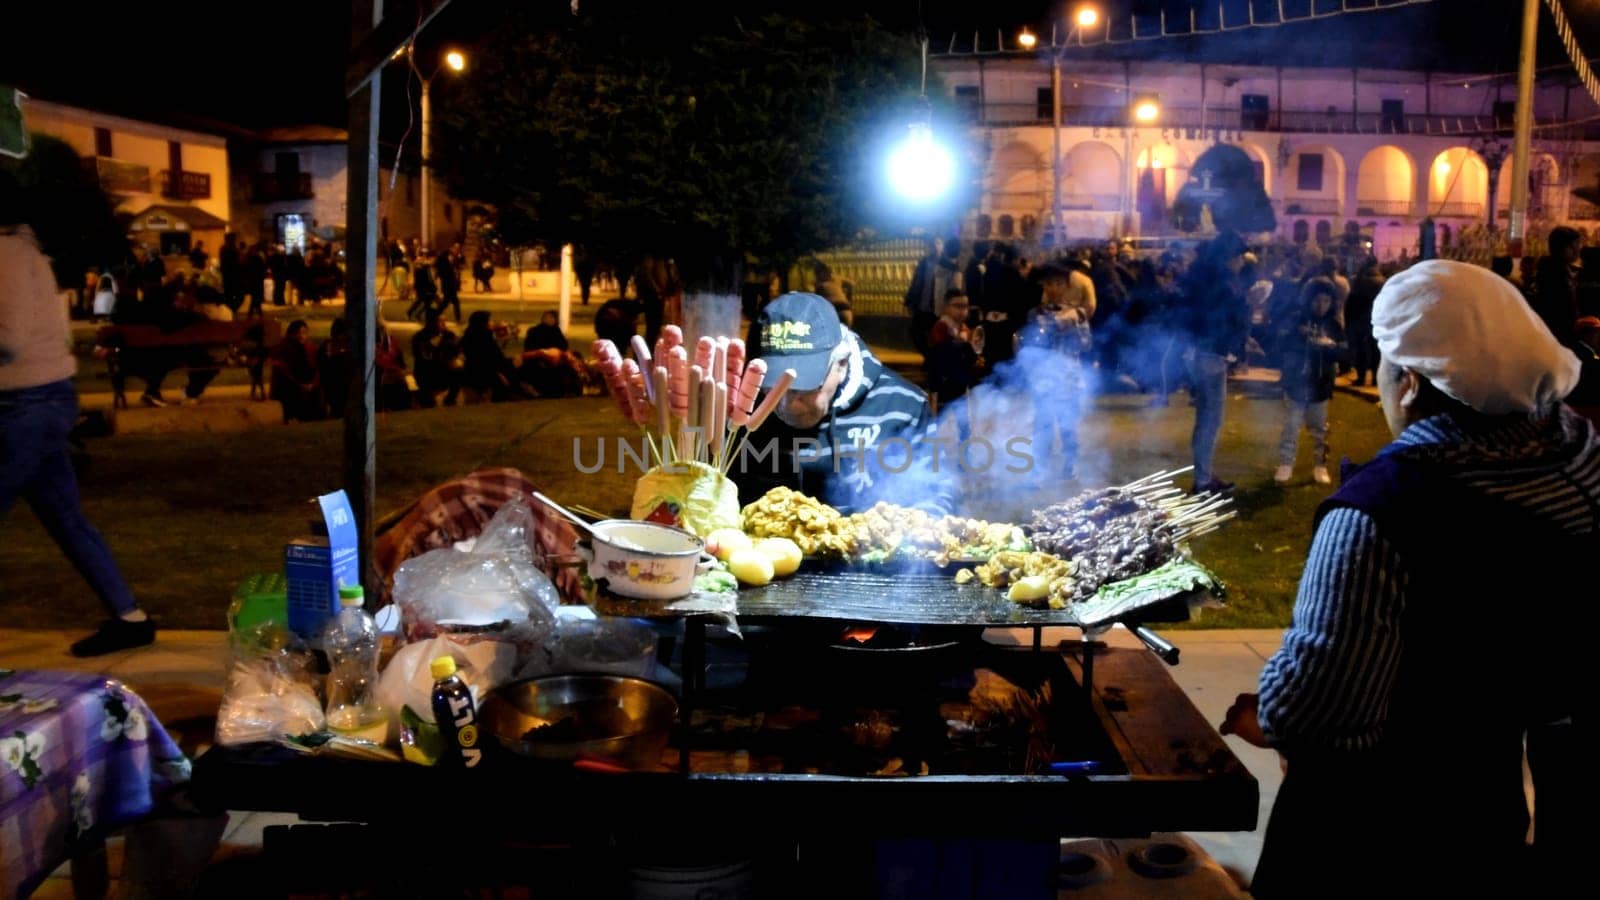 Street vendor grilling food at night market by Peruphotoart